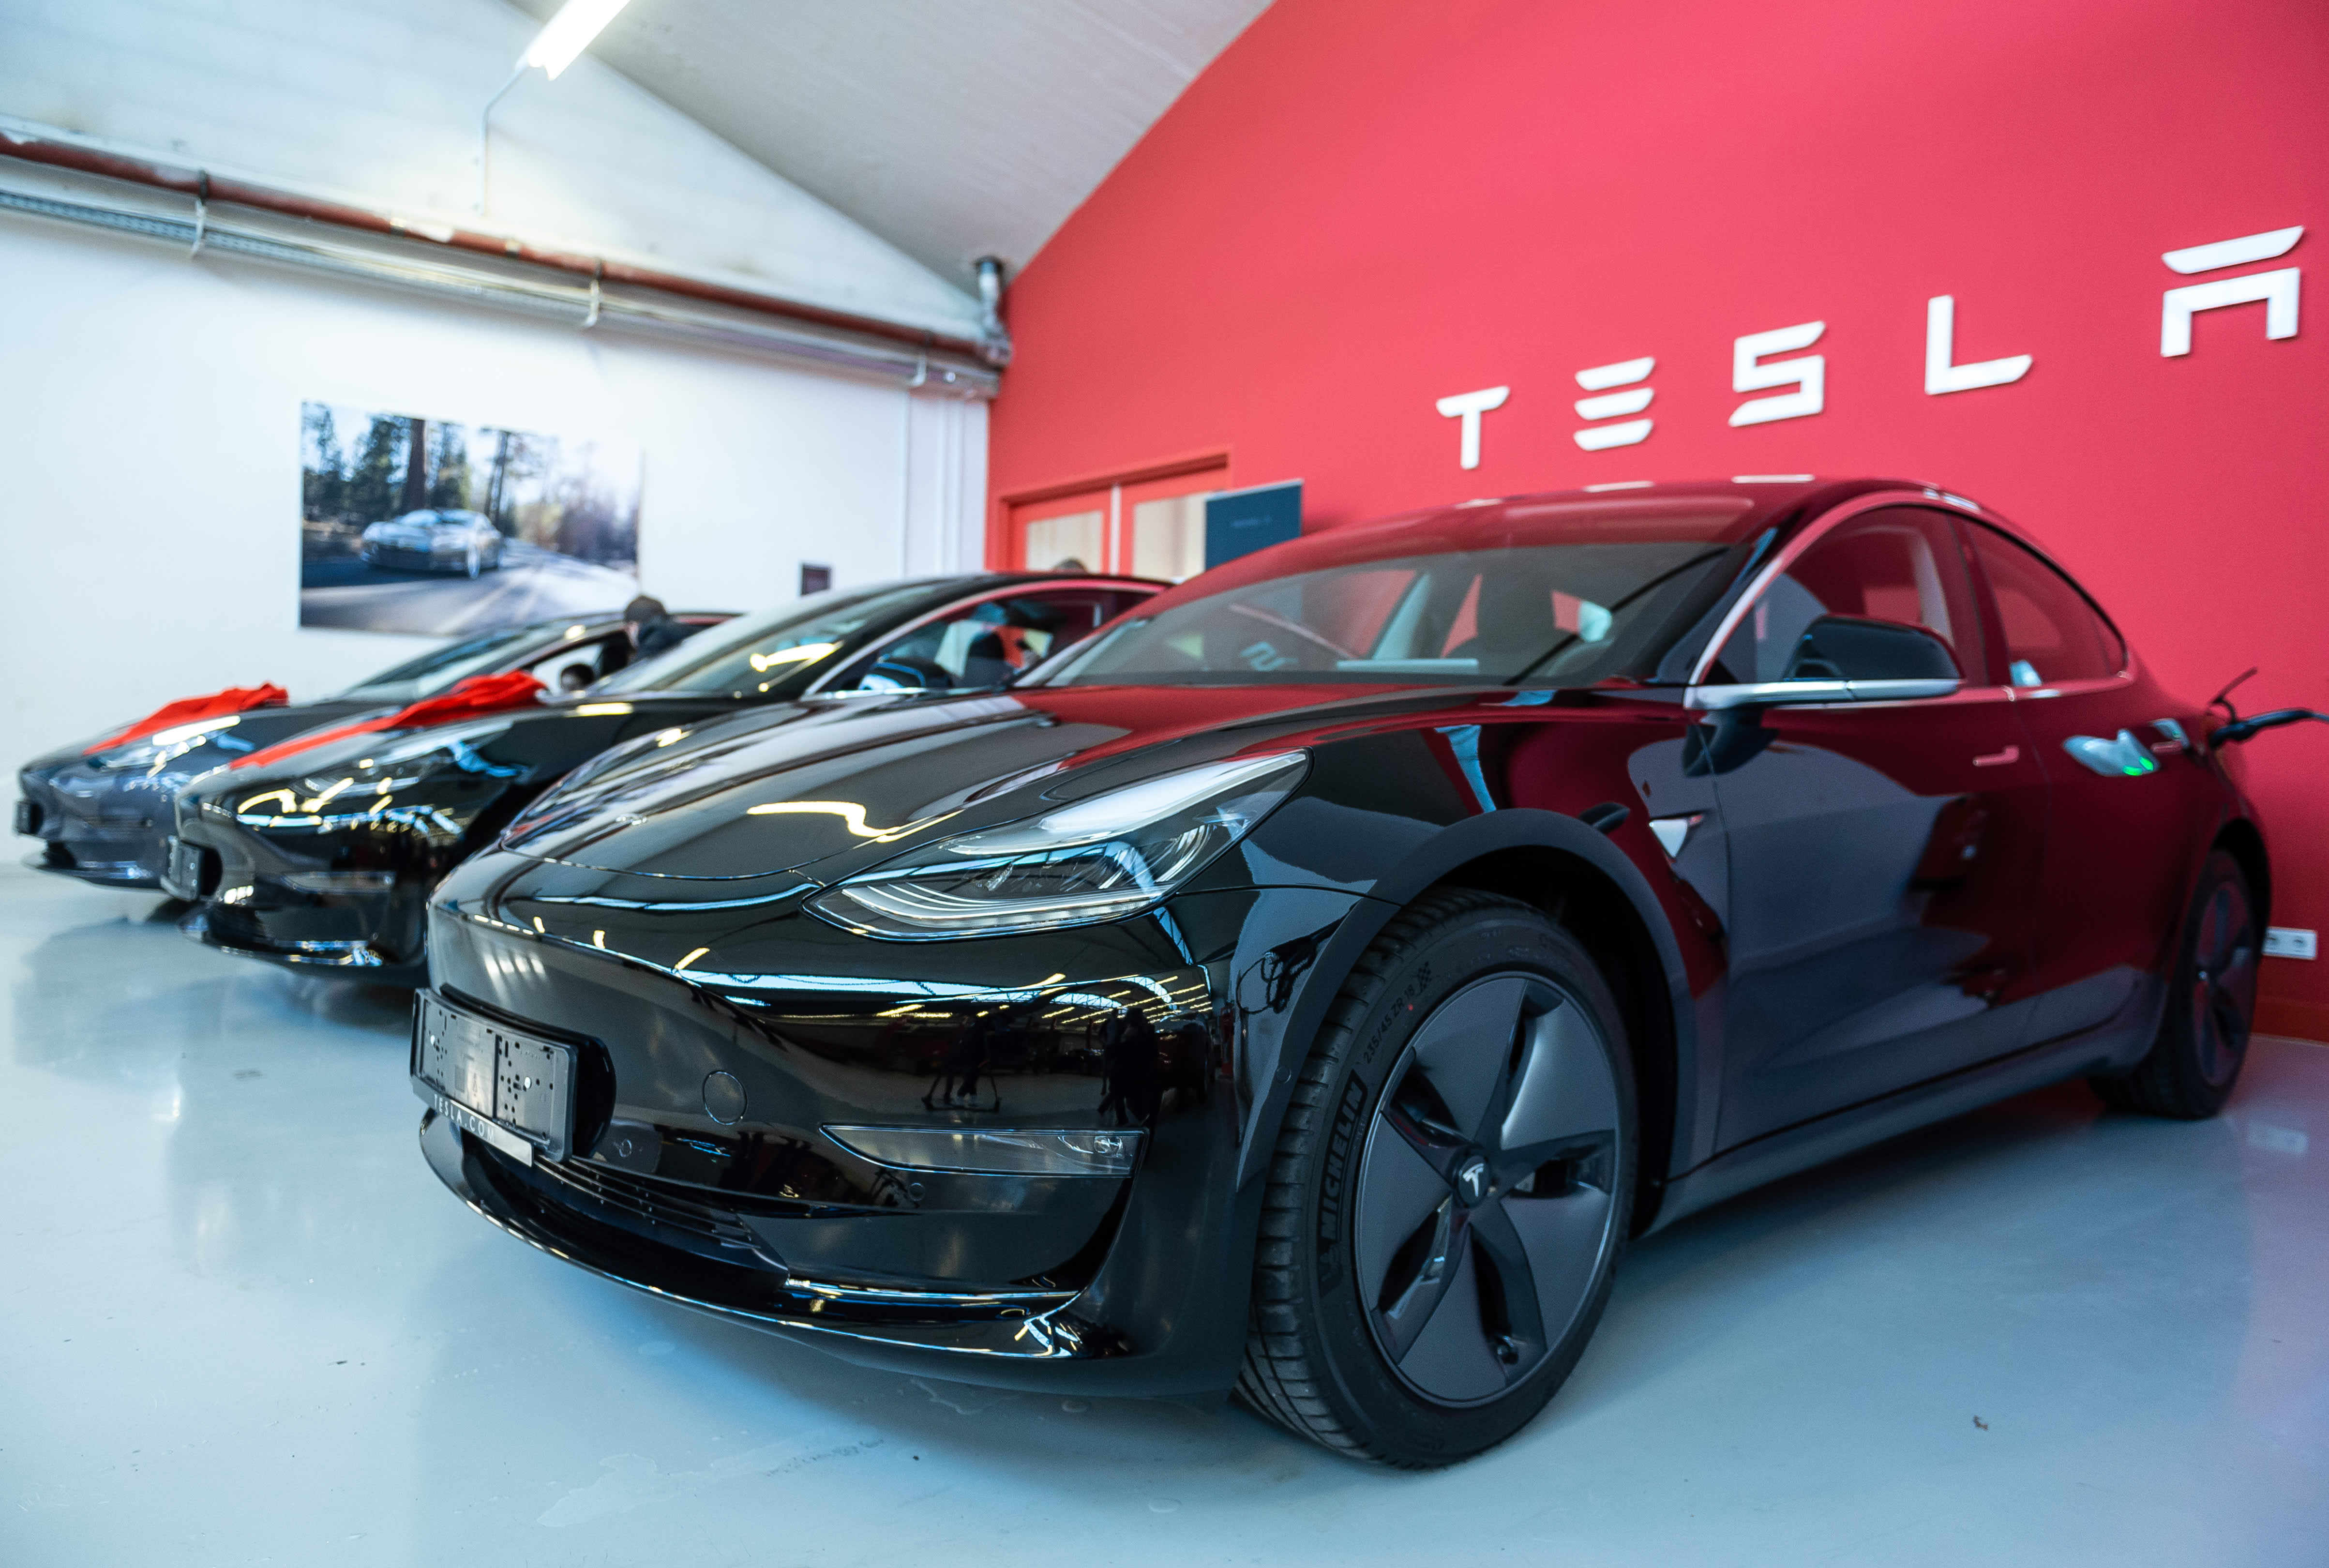 Norway Where The Electric Tesla Has Become The Budget Option